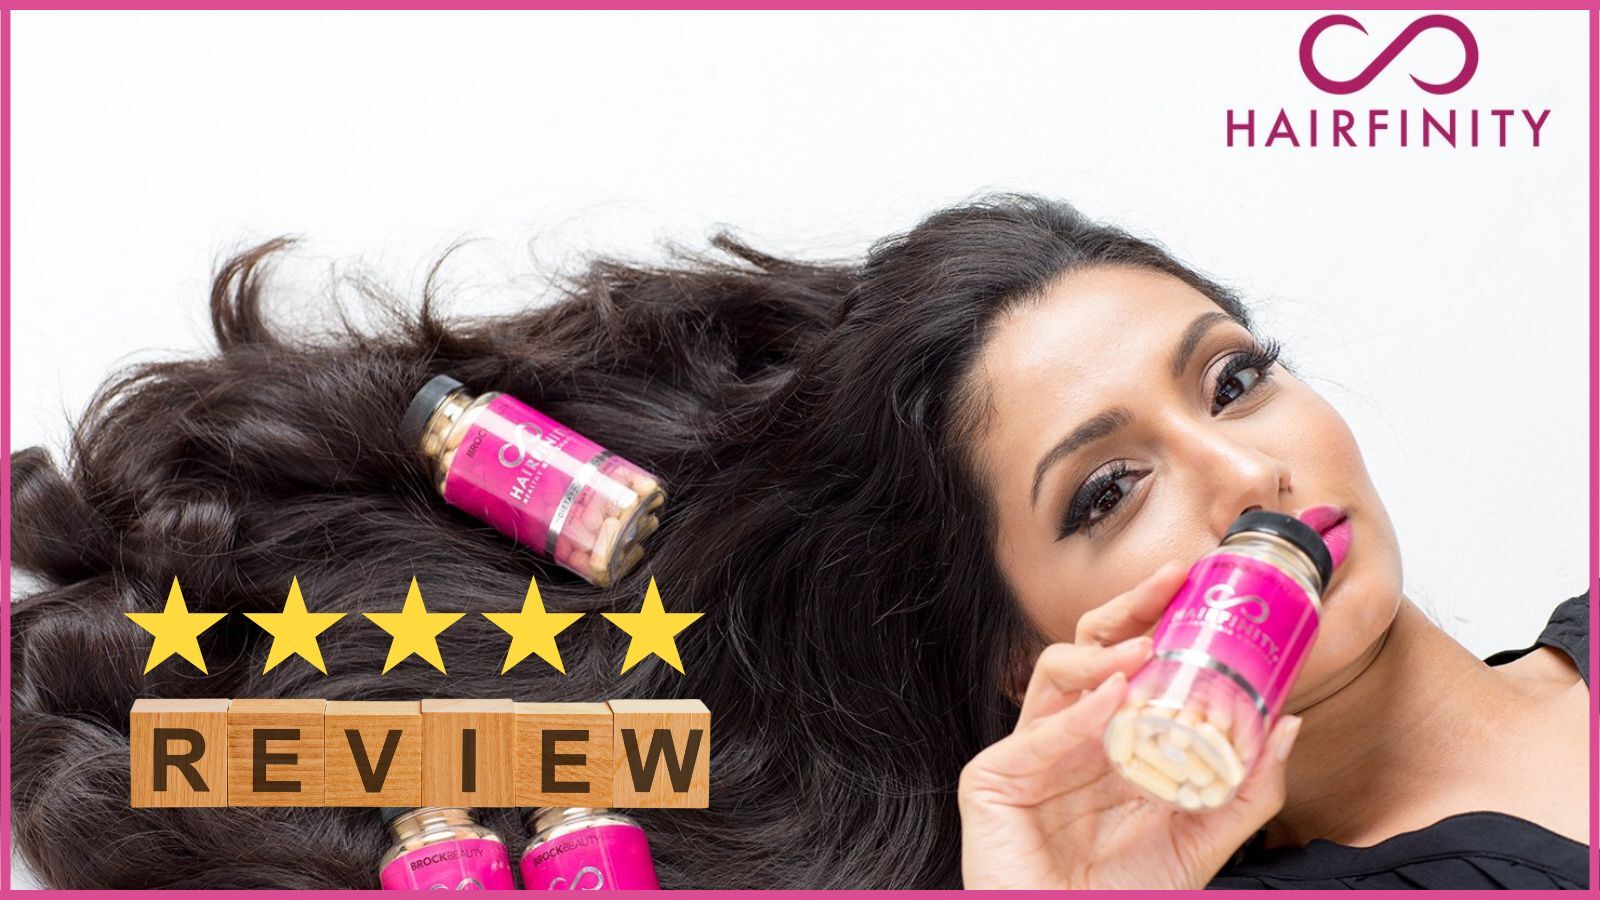 Hairfinity Vitamins Review: Does It Really Work?